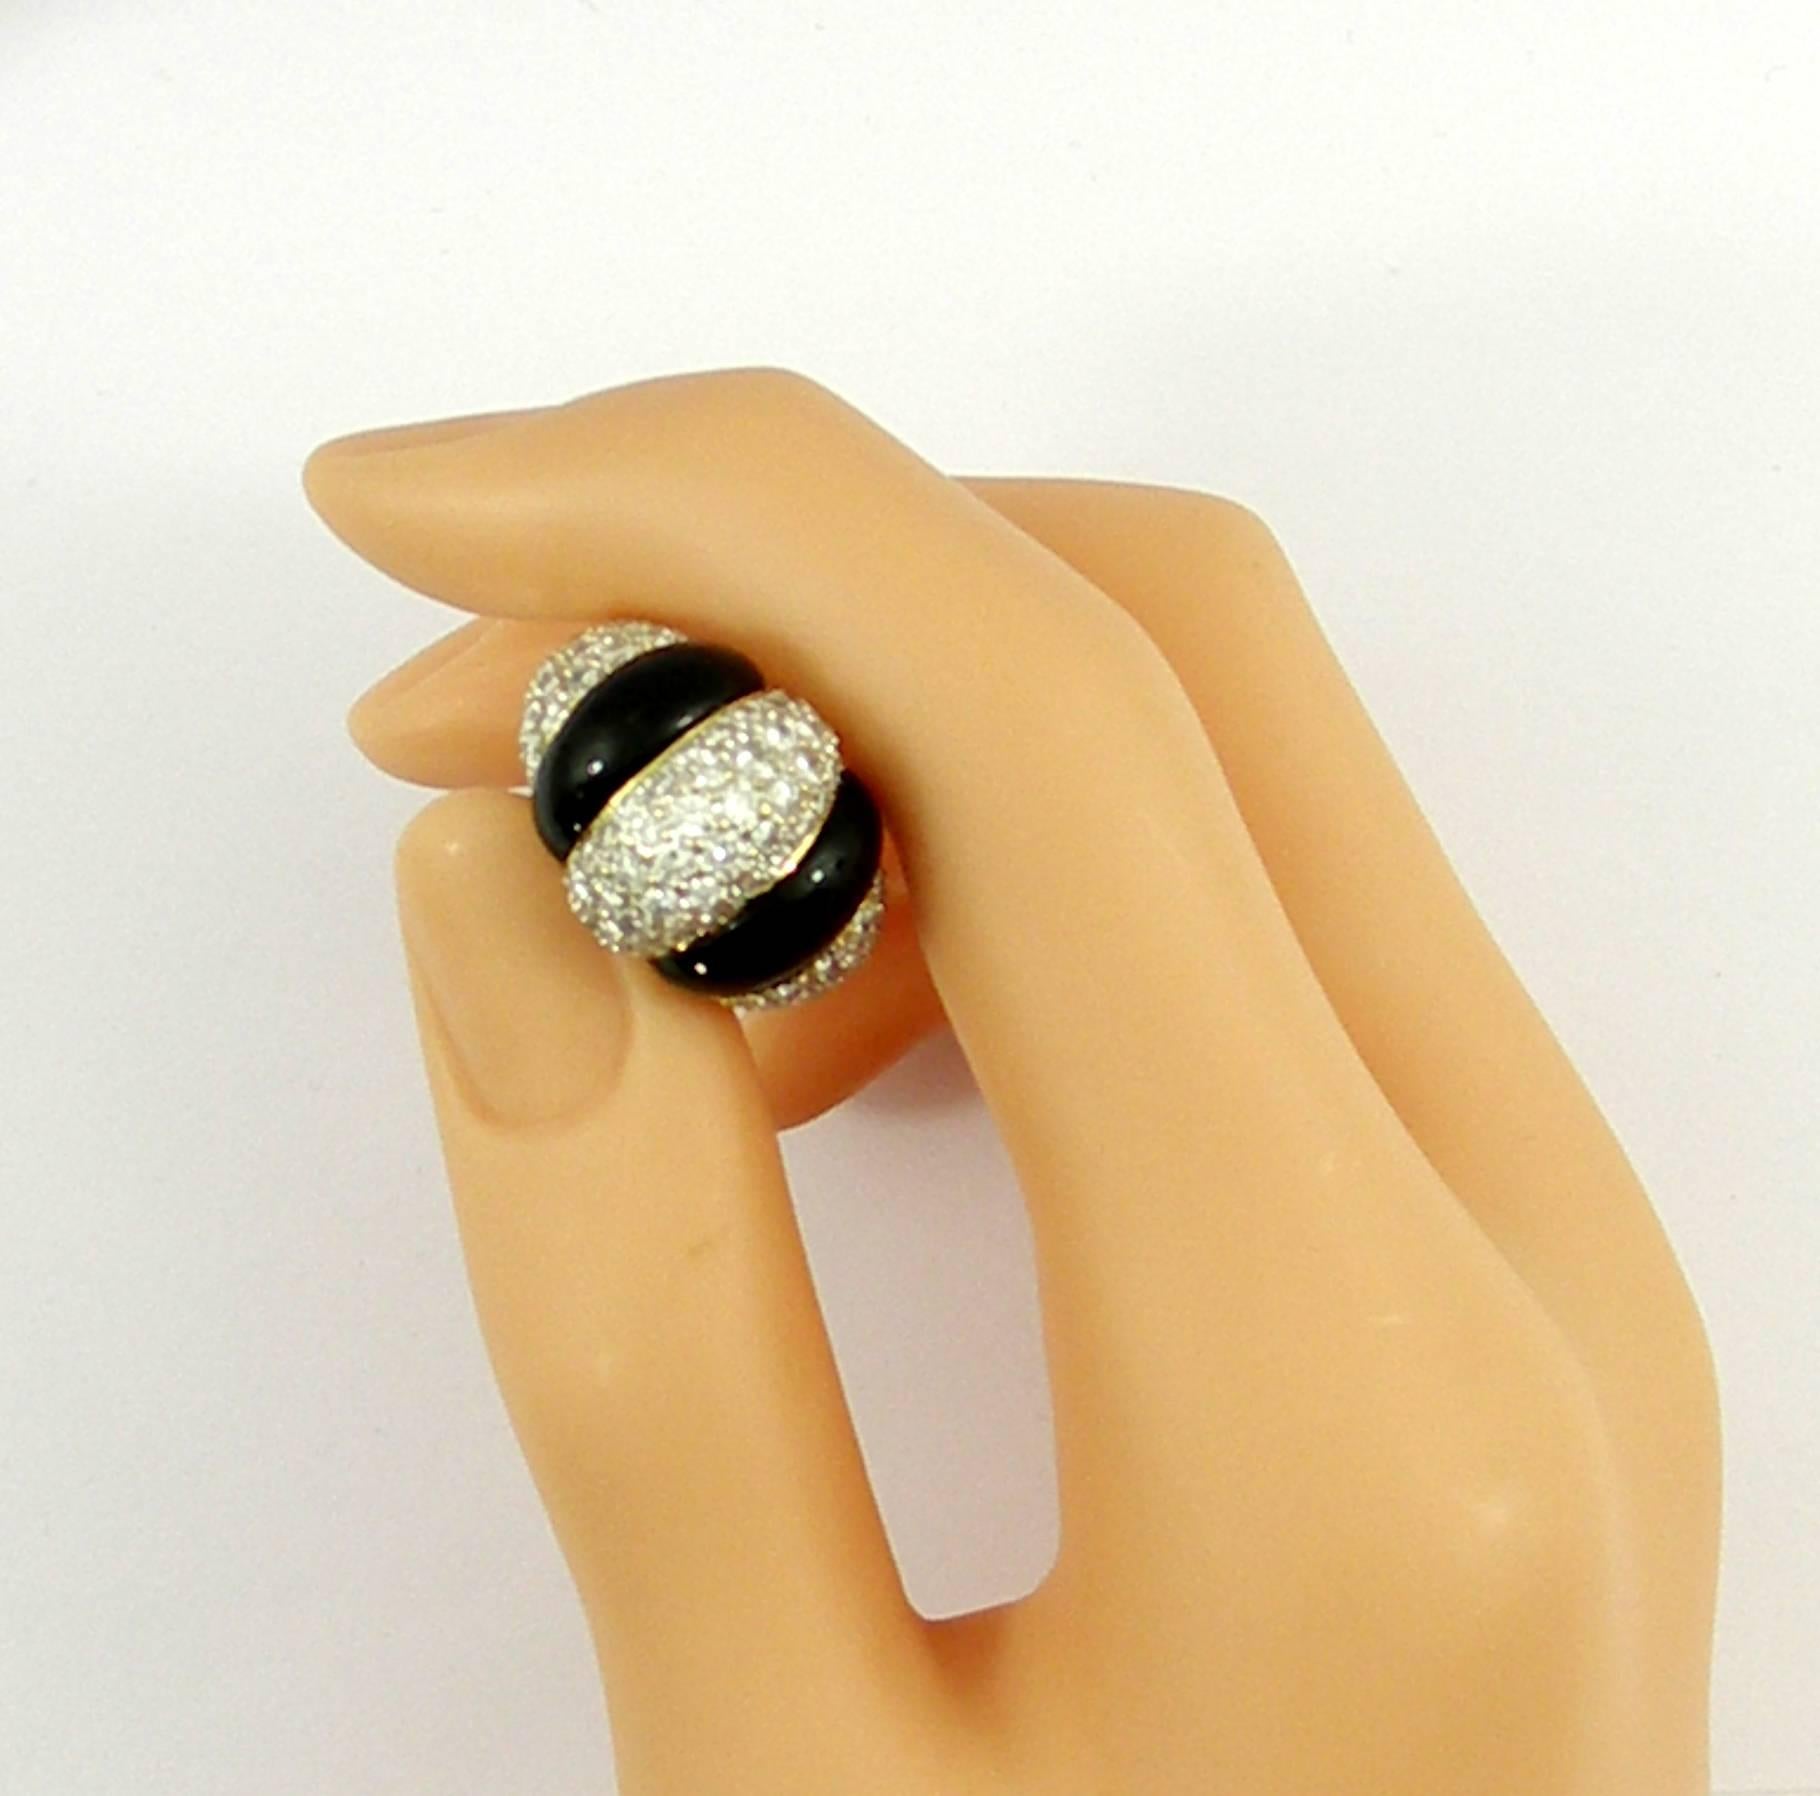 One ladies 18 karat yellow gold ring measuring 5/8 of an inch wide with three pave diamond sections and two onyx stripes. Overall diamond weight is approximately 3.4 ct, and diamonds are of F/G color and VS1 clarity. Ring is a size 7 1/4, and